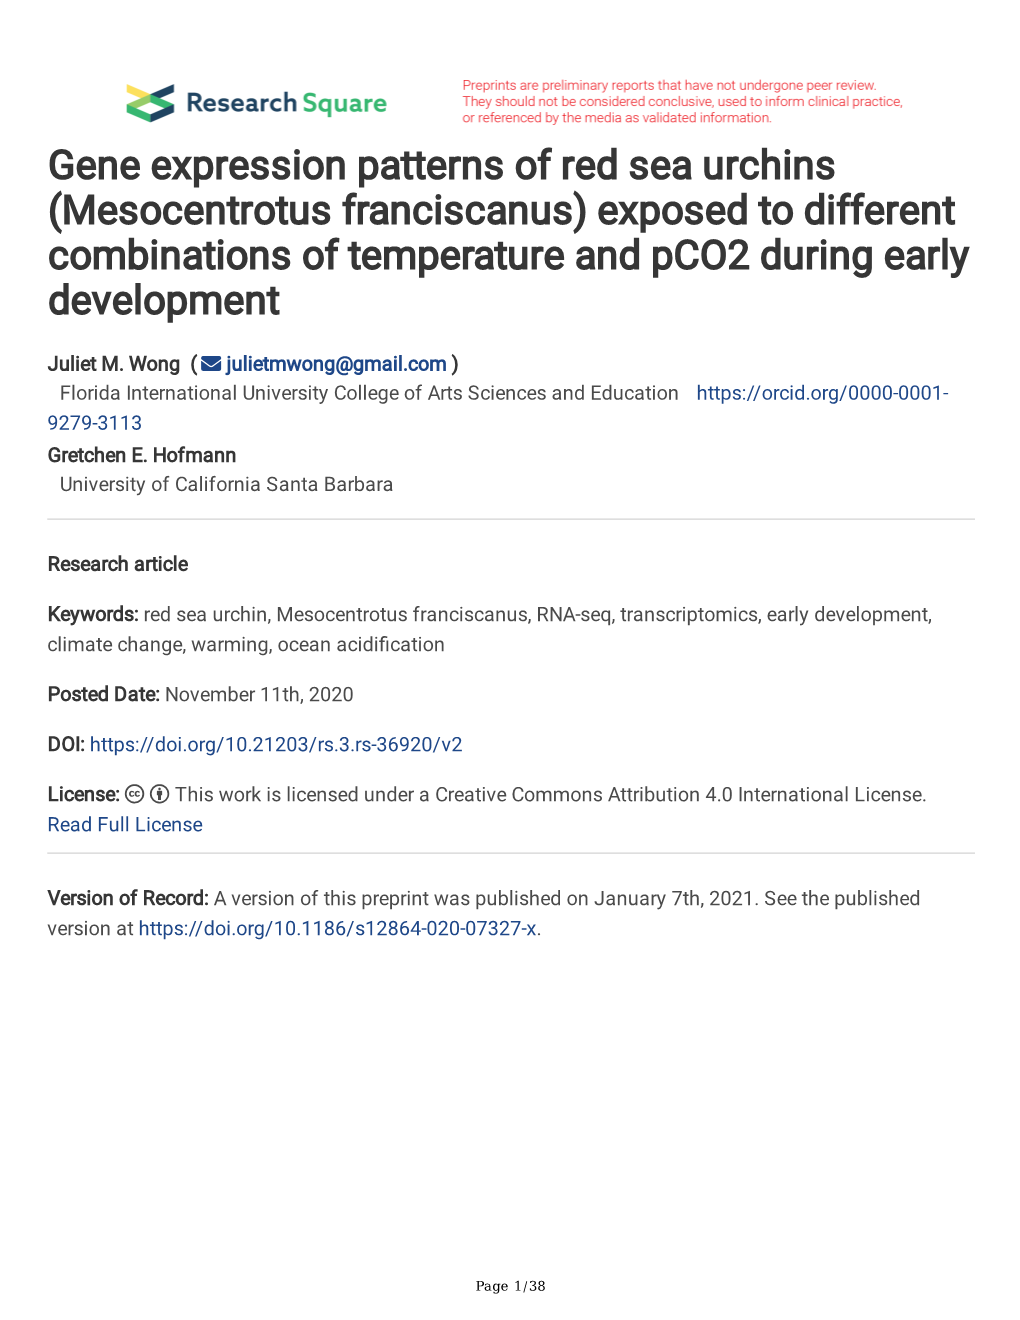 Gene Expression Patterns of Red Sea Urchins (Mesocentrotus Franciscanus) Exposed to Different Combinations of Temperature and Pco2 During Early Development